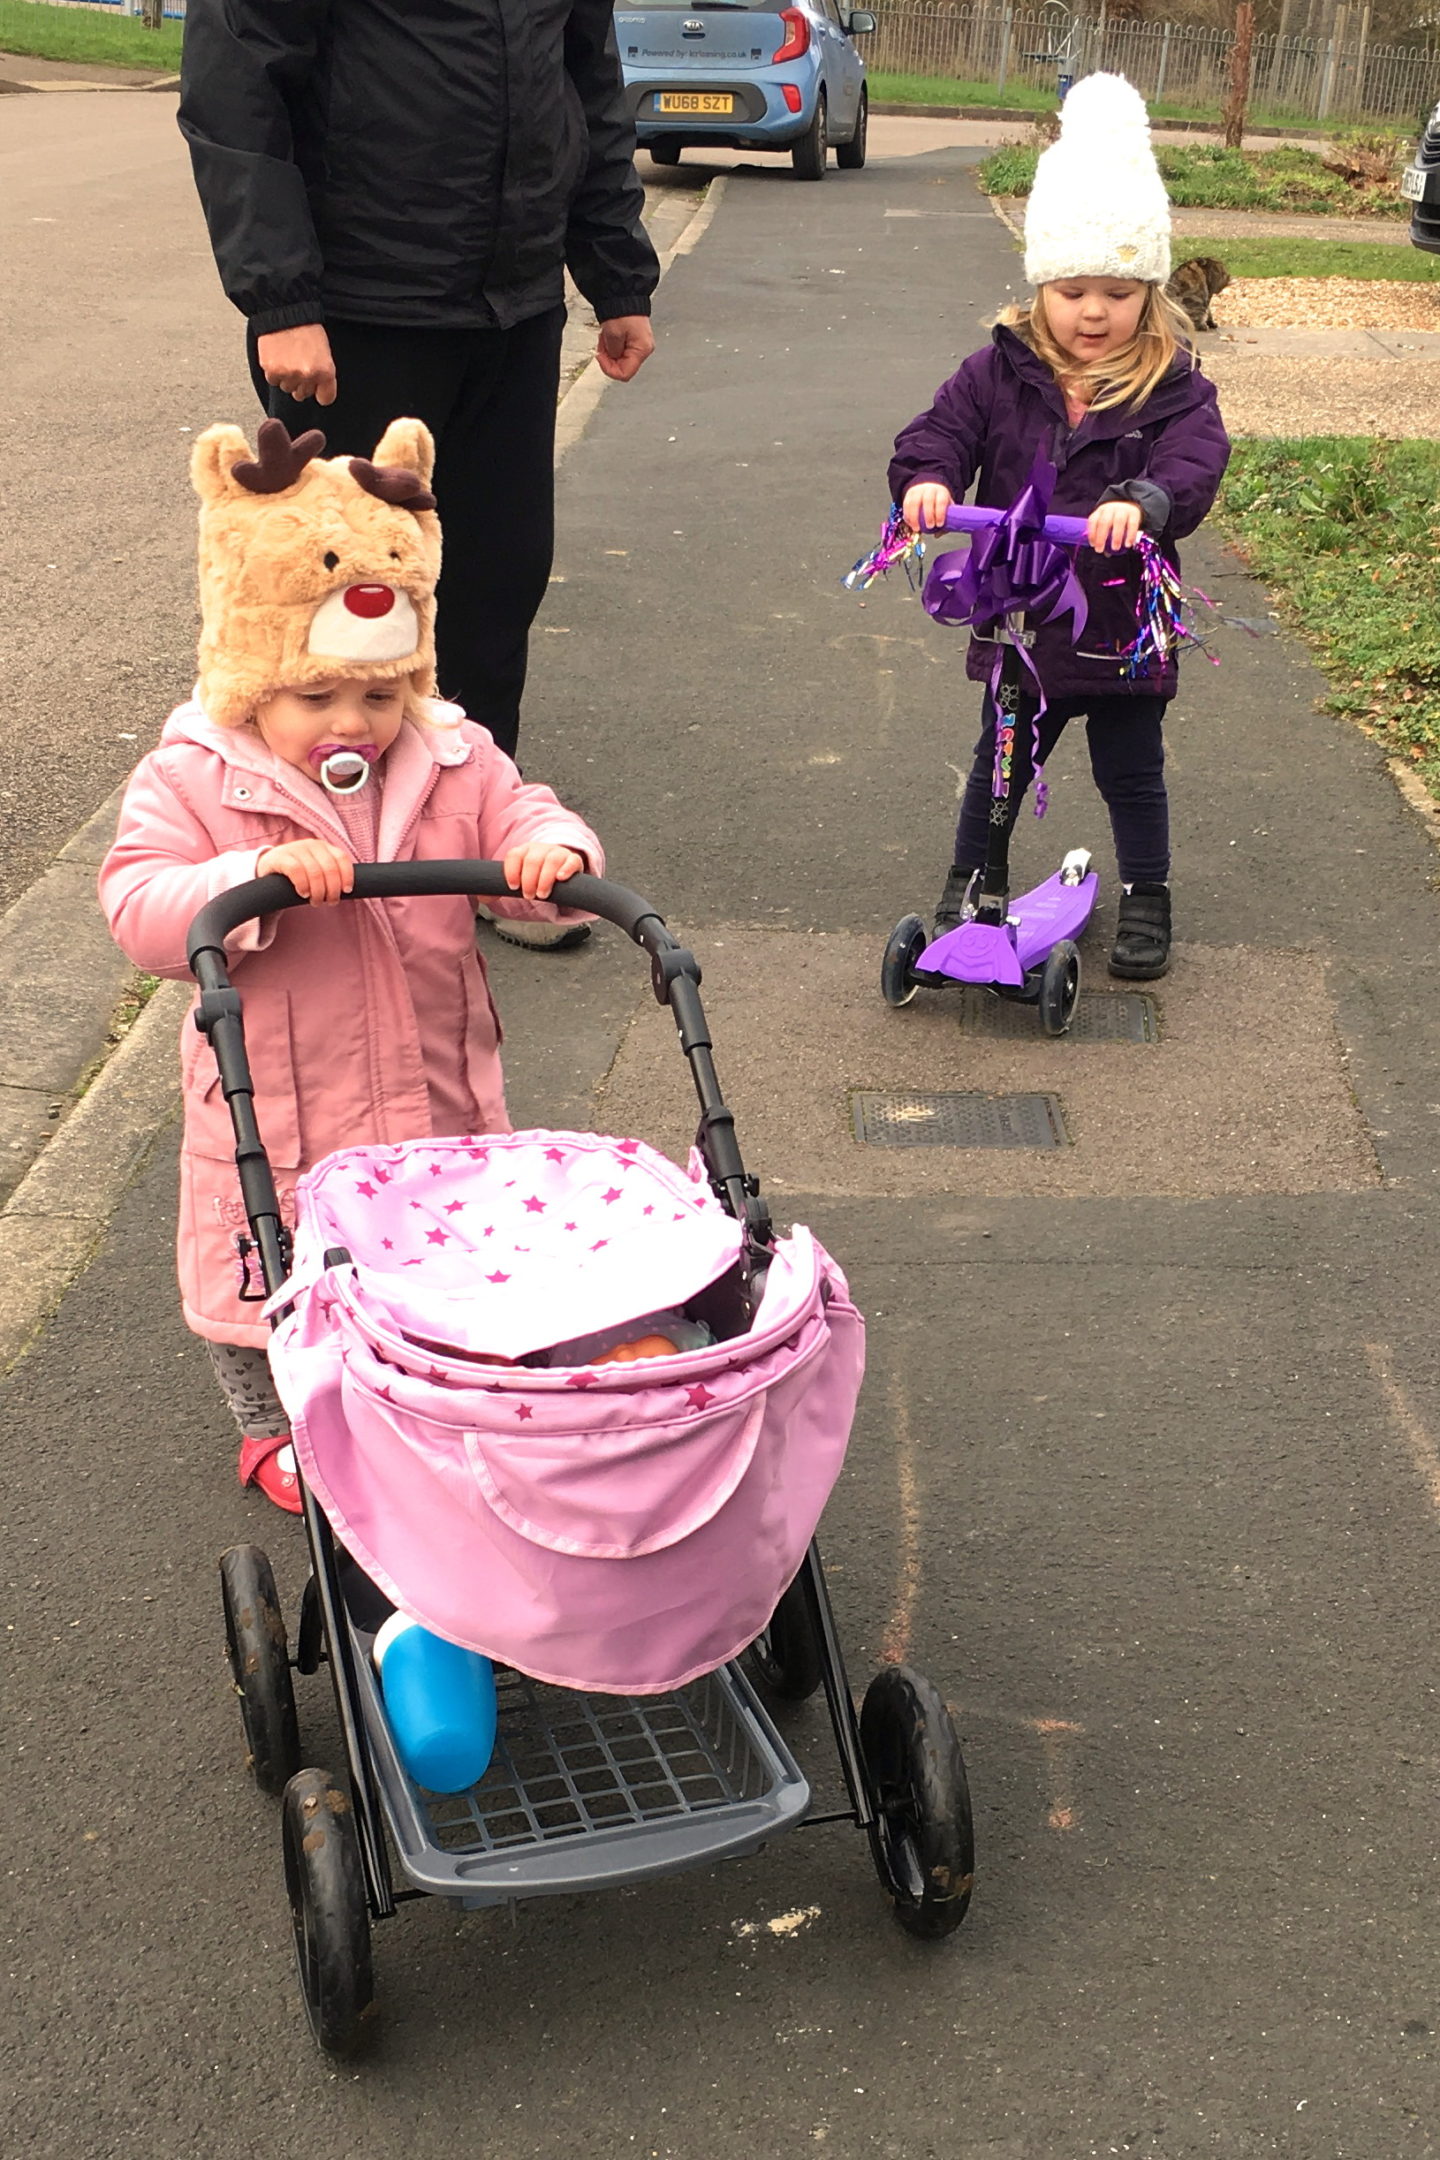 two sisters, one pushing a dolls pram, and one on a scooter, going out for a walk with their dad